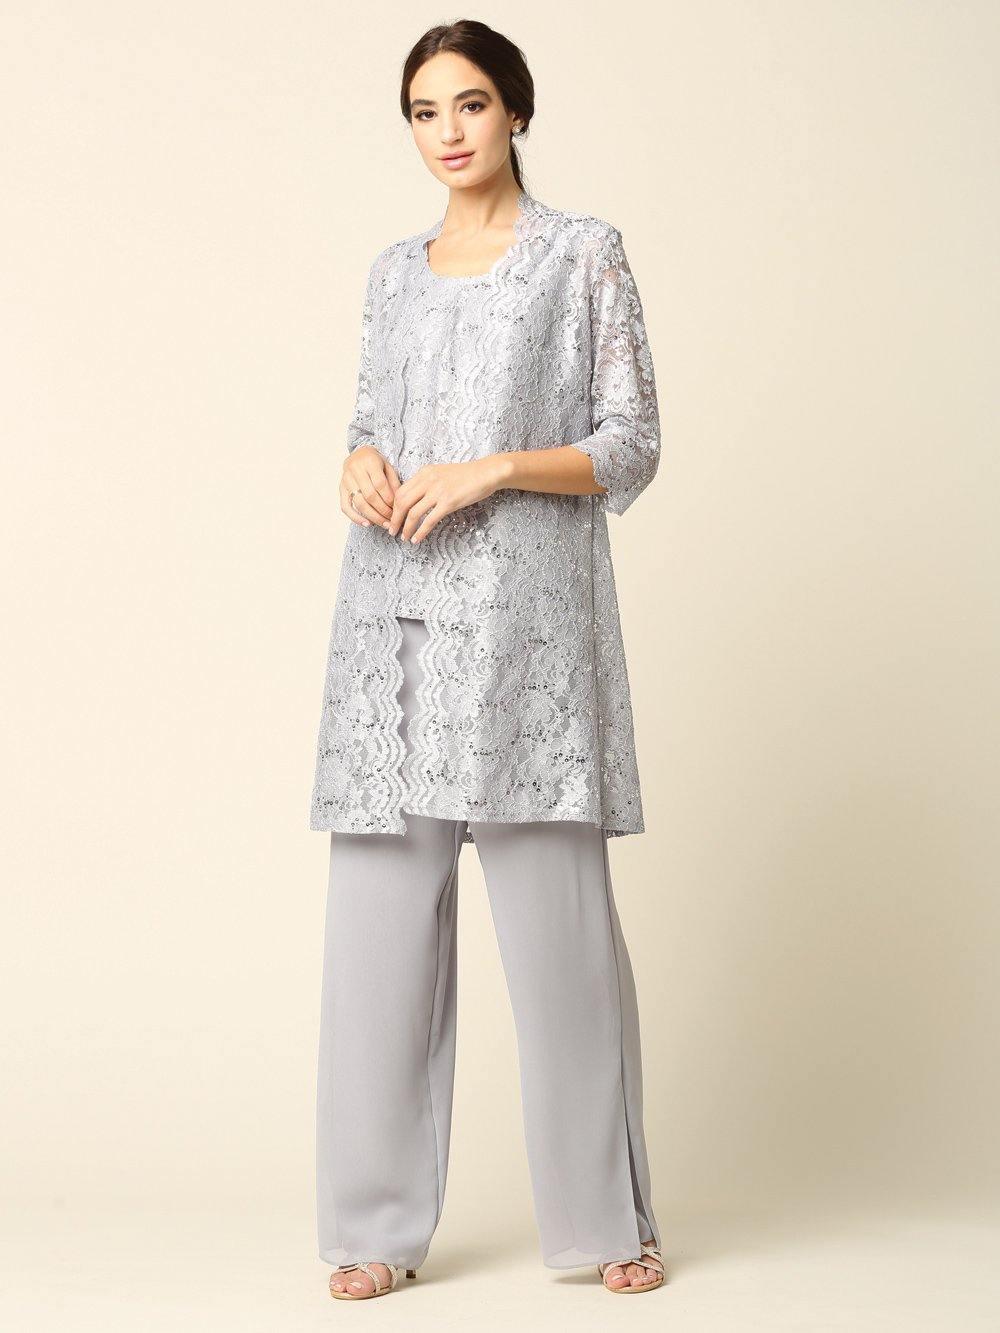 Mother of the Bride Long Jacket Pant Suit Sale - The Dress Outlet